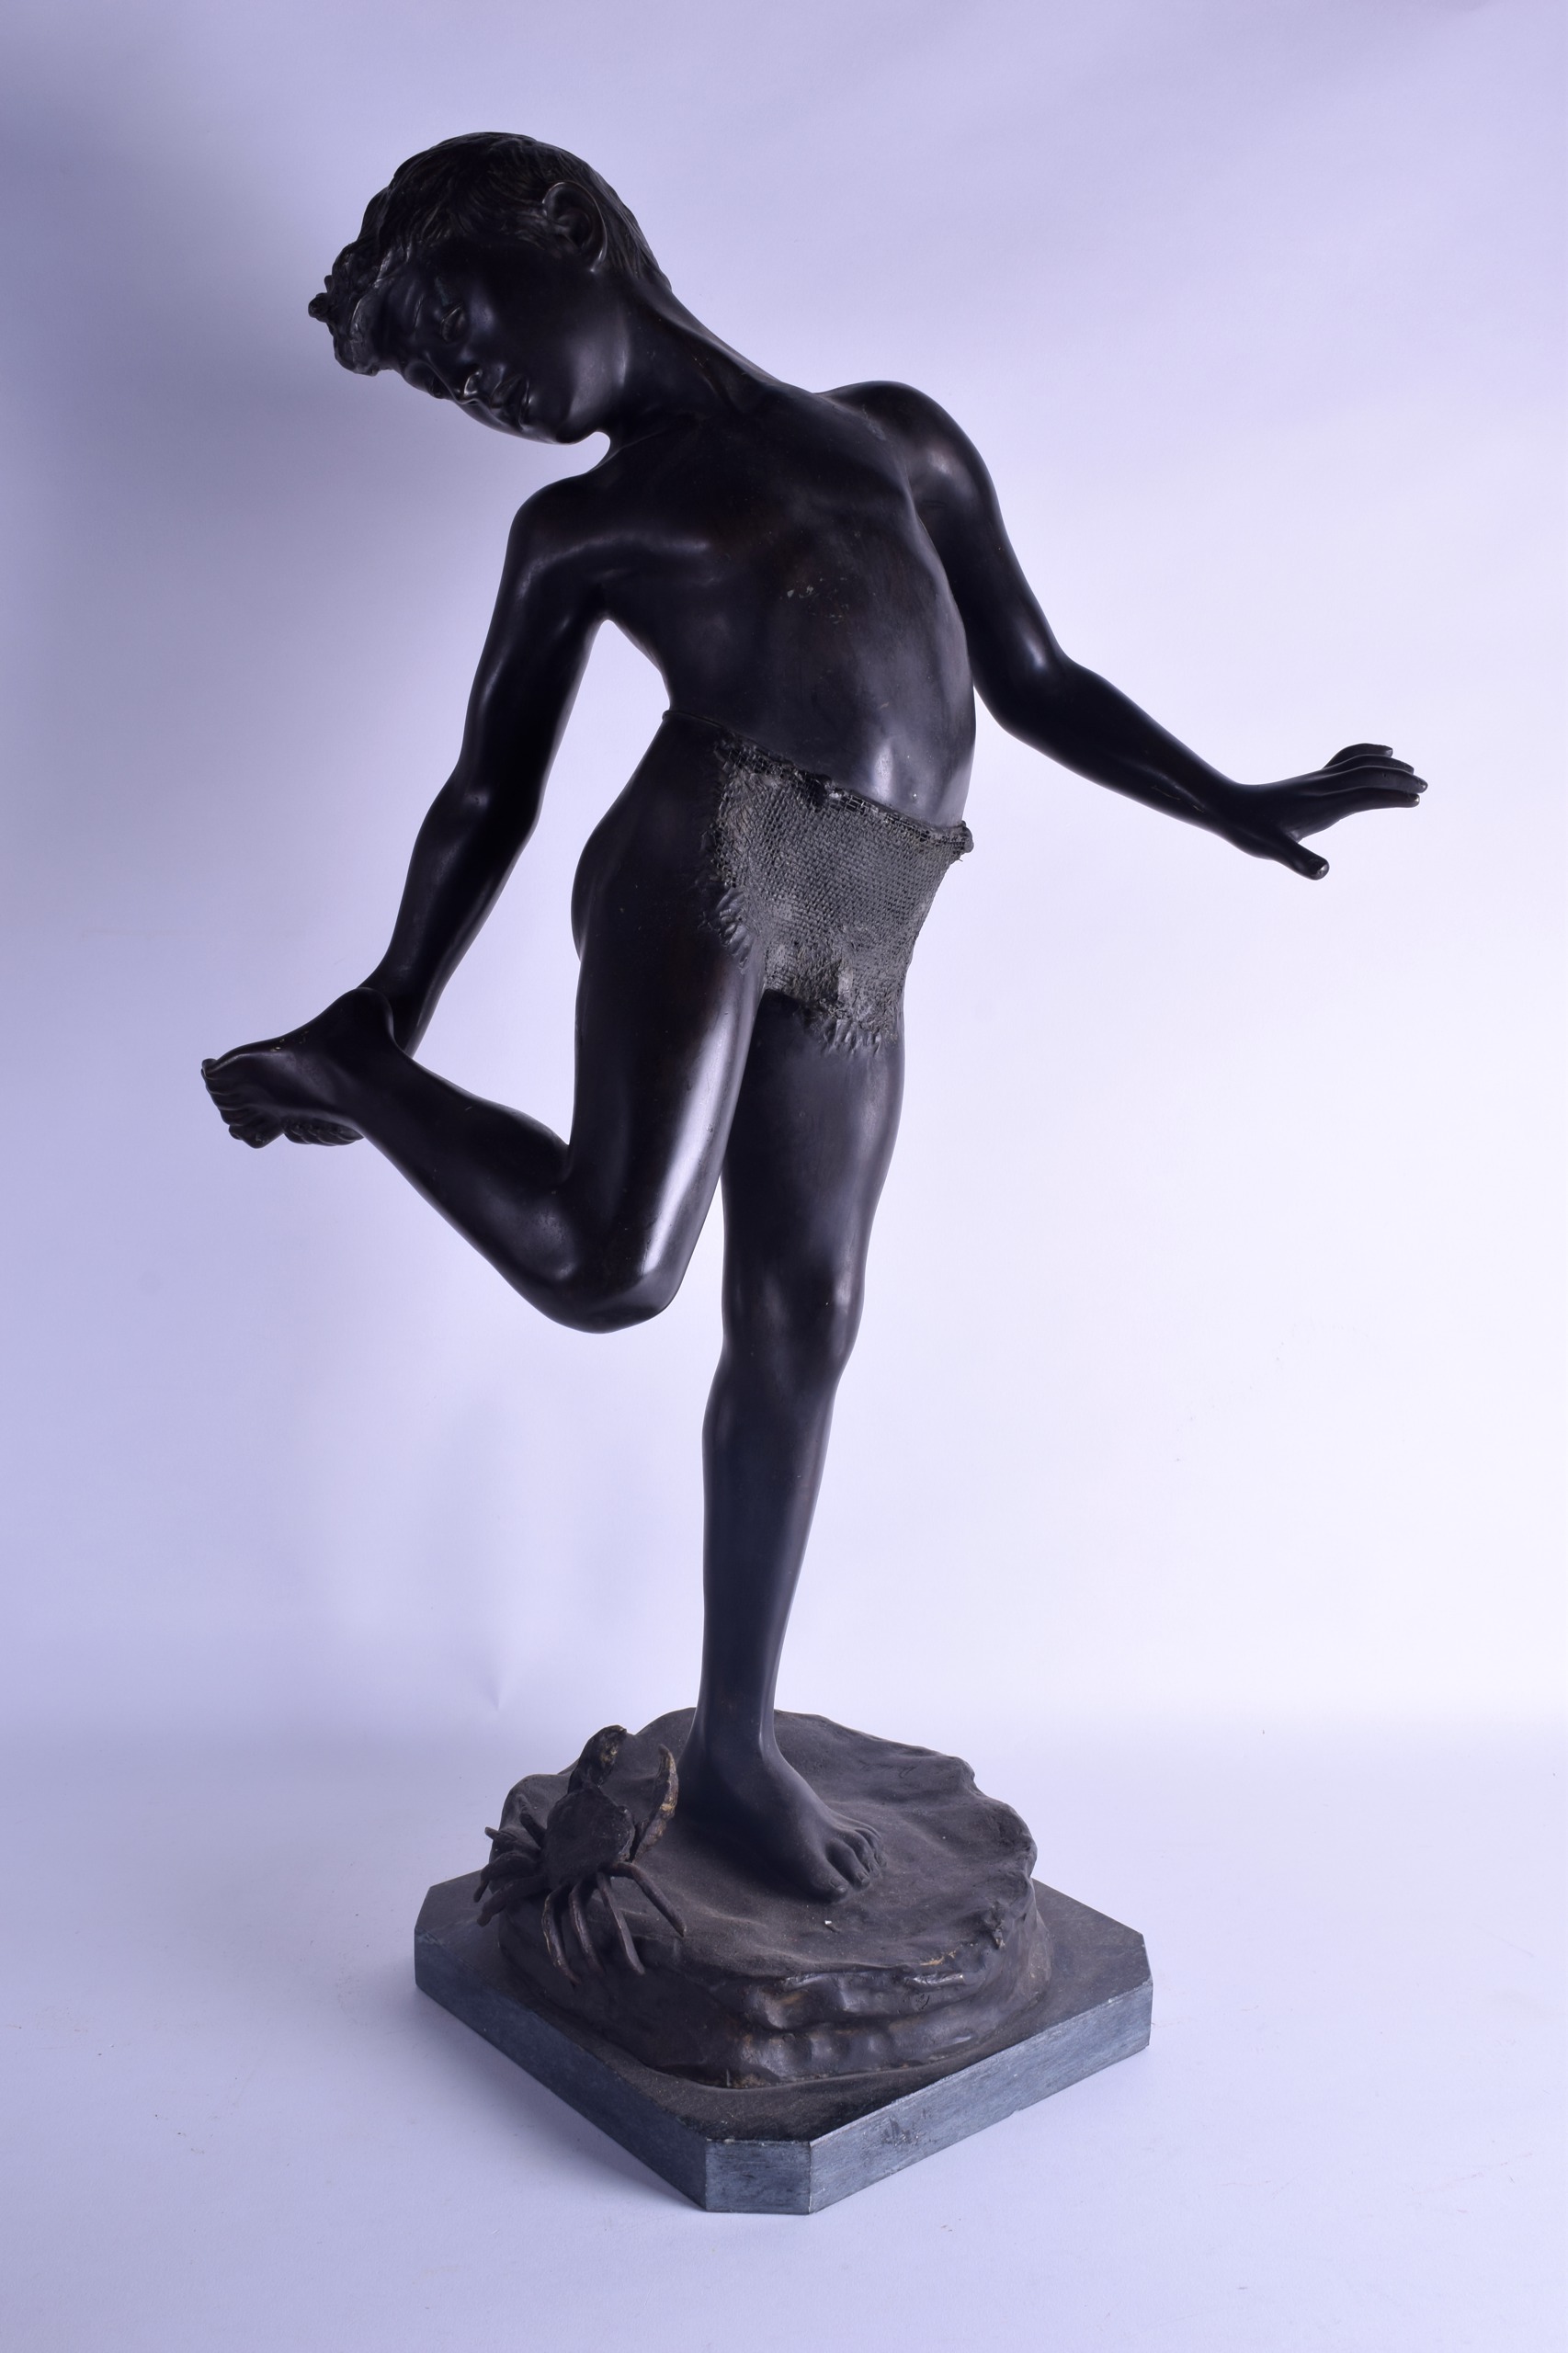 Annibale De Lotto (1877-1932) An early 20th century Italian bronze figure of a young fisher boy, 'Il